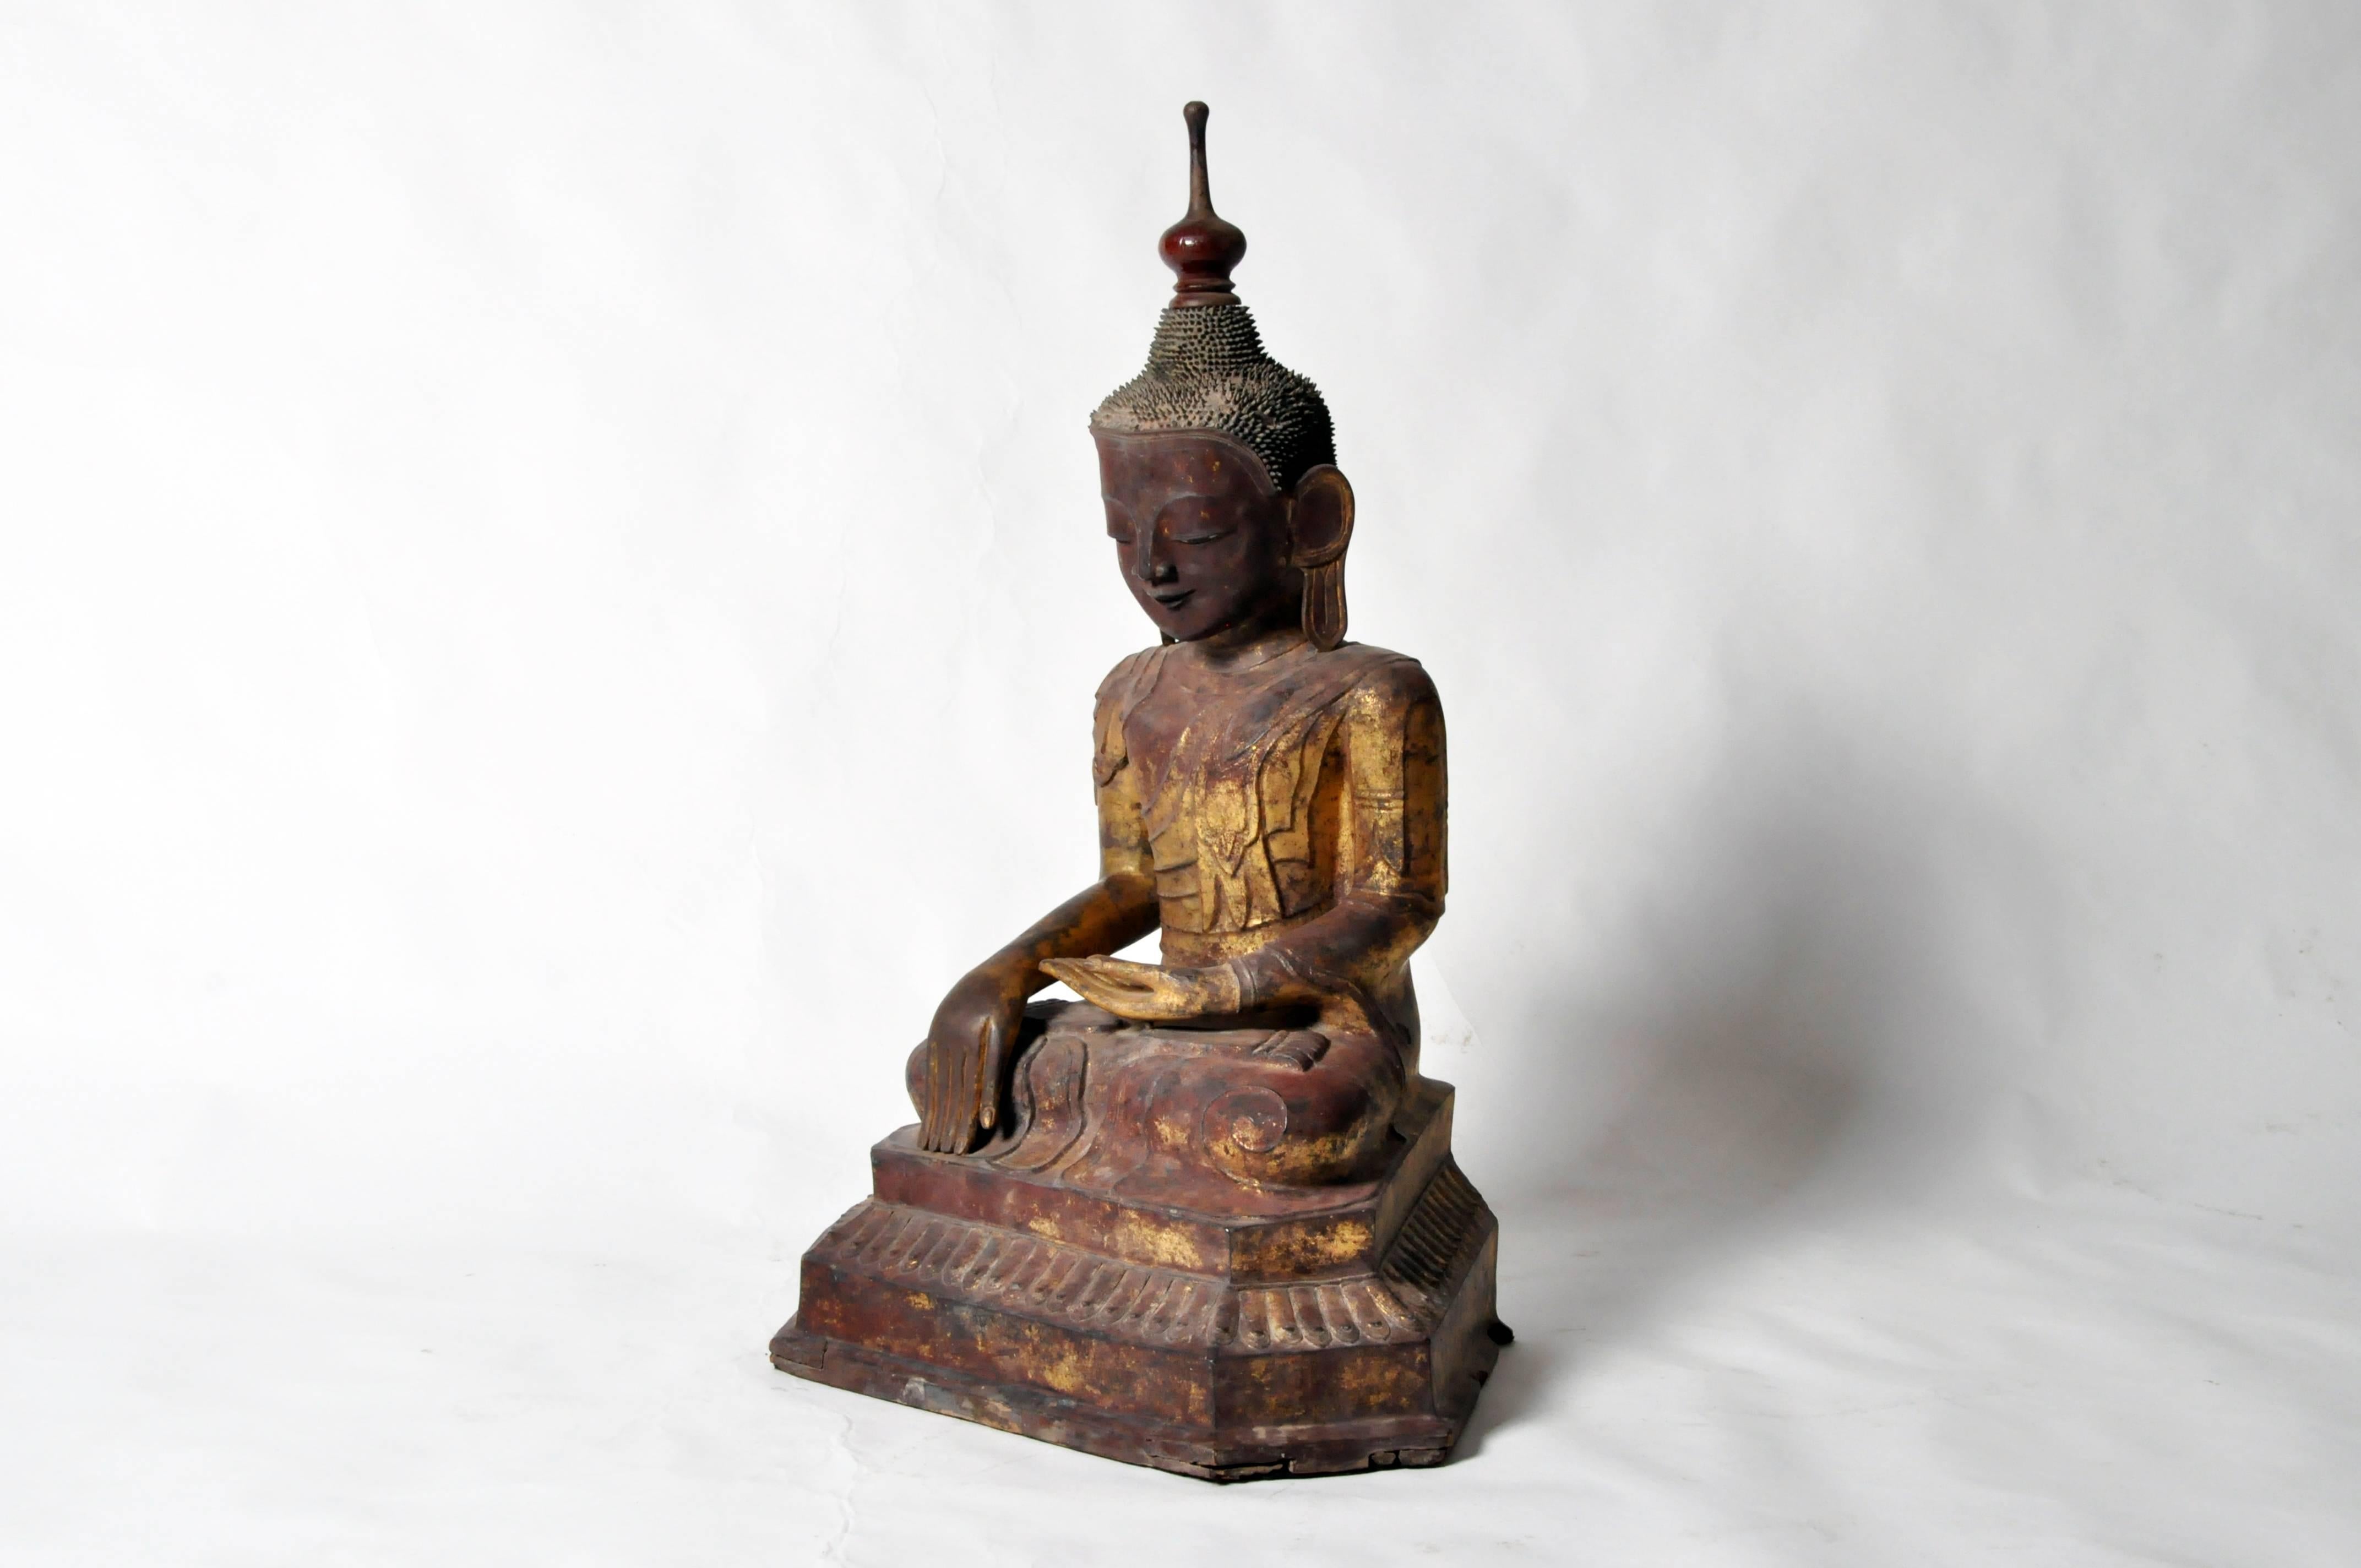 This large and important representation of the historical Buddha, Siddhārtha Gautama, was done in dry lacquer and richly gilt according to Shan-Burmese sculptural traditions. Though territorially part of Burma, the Shan states developed their own